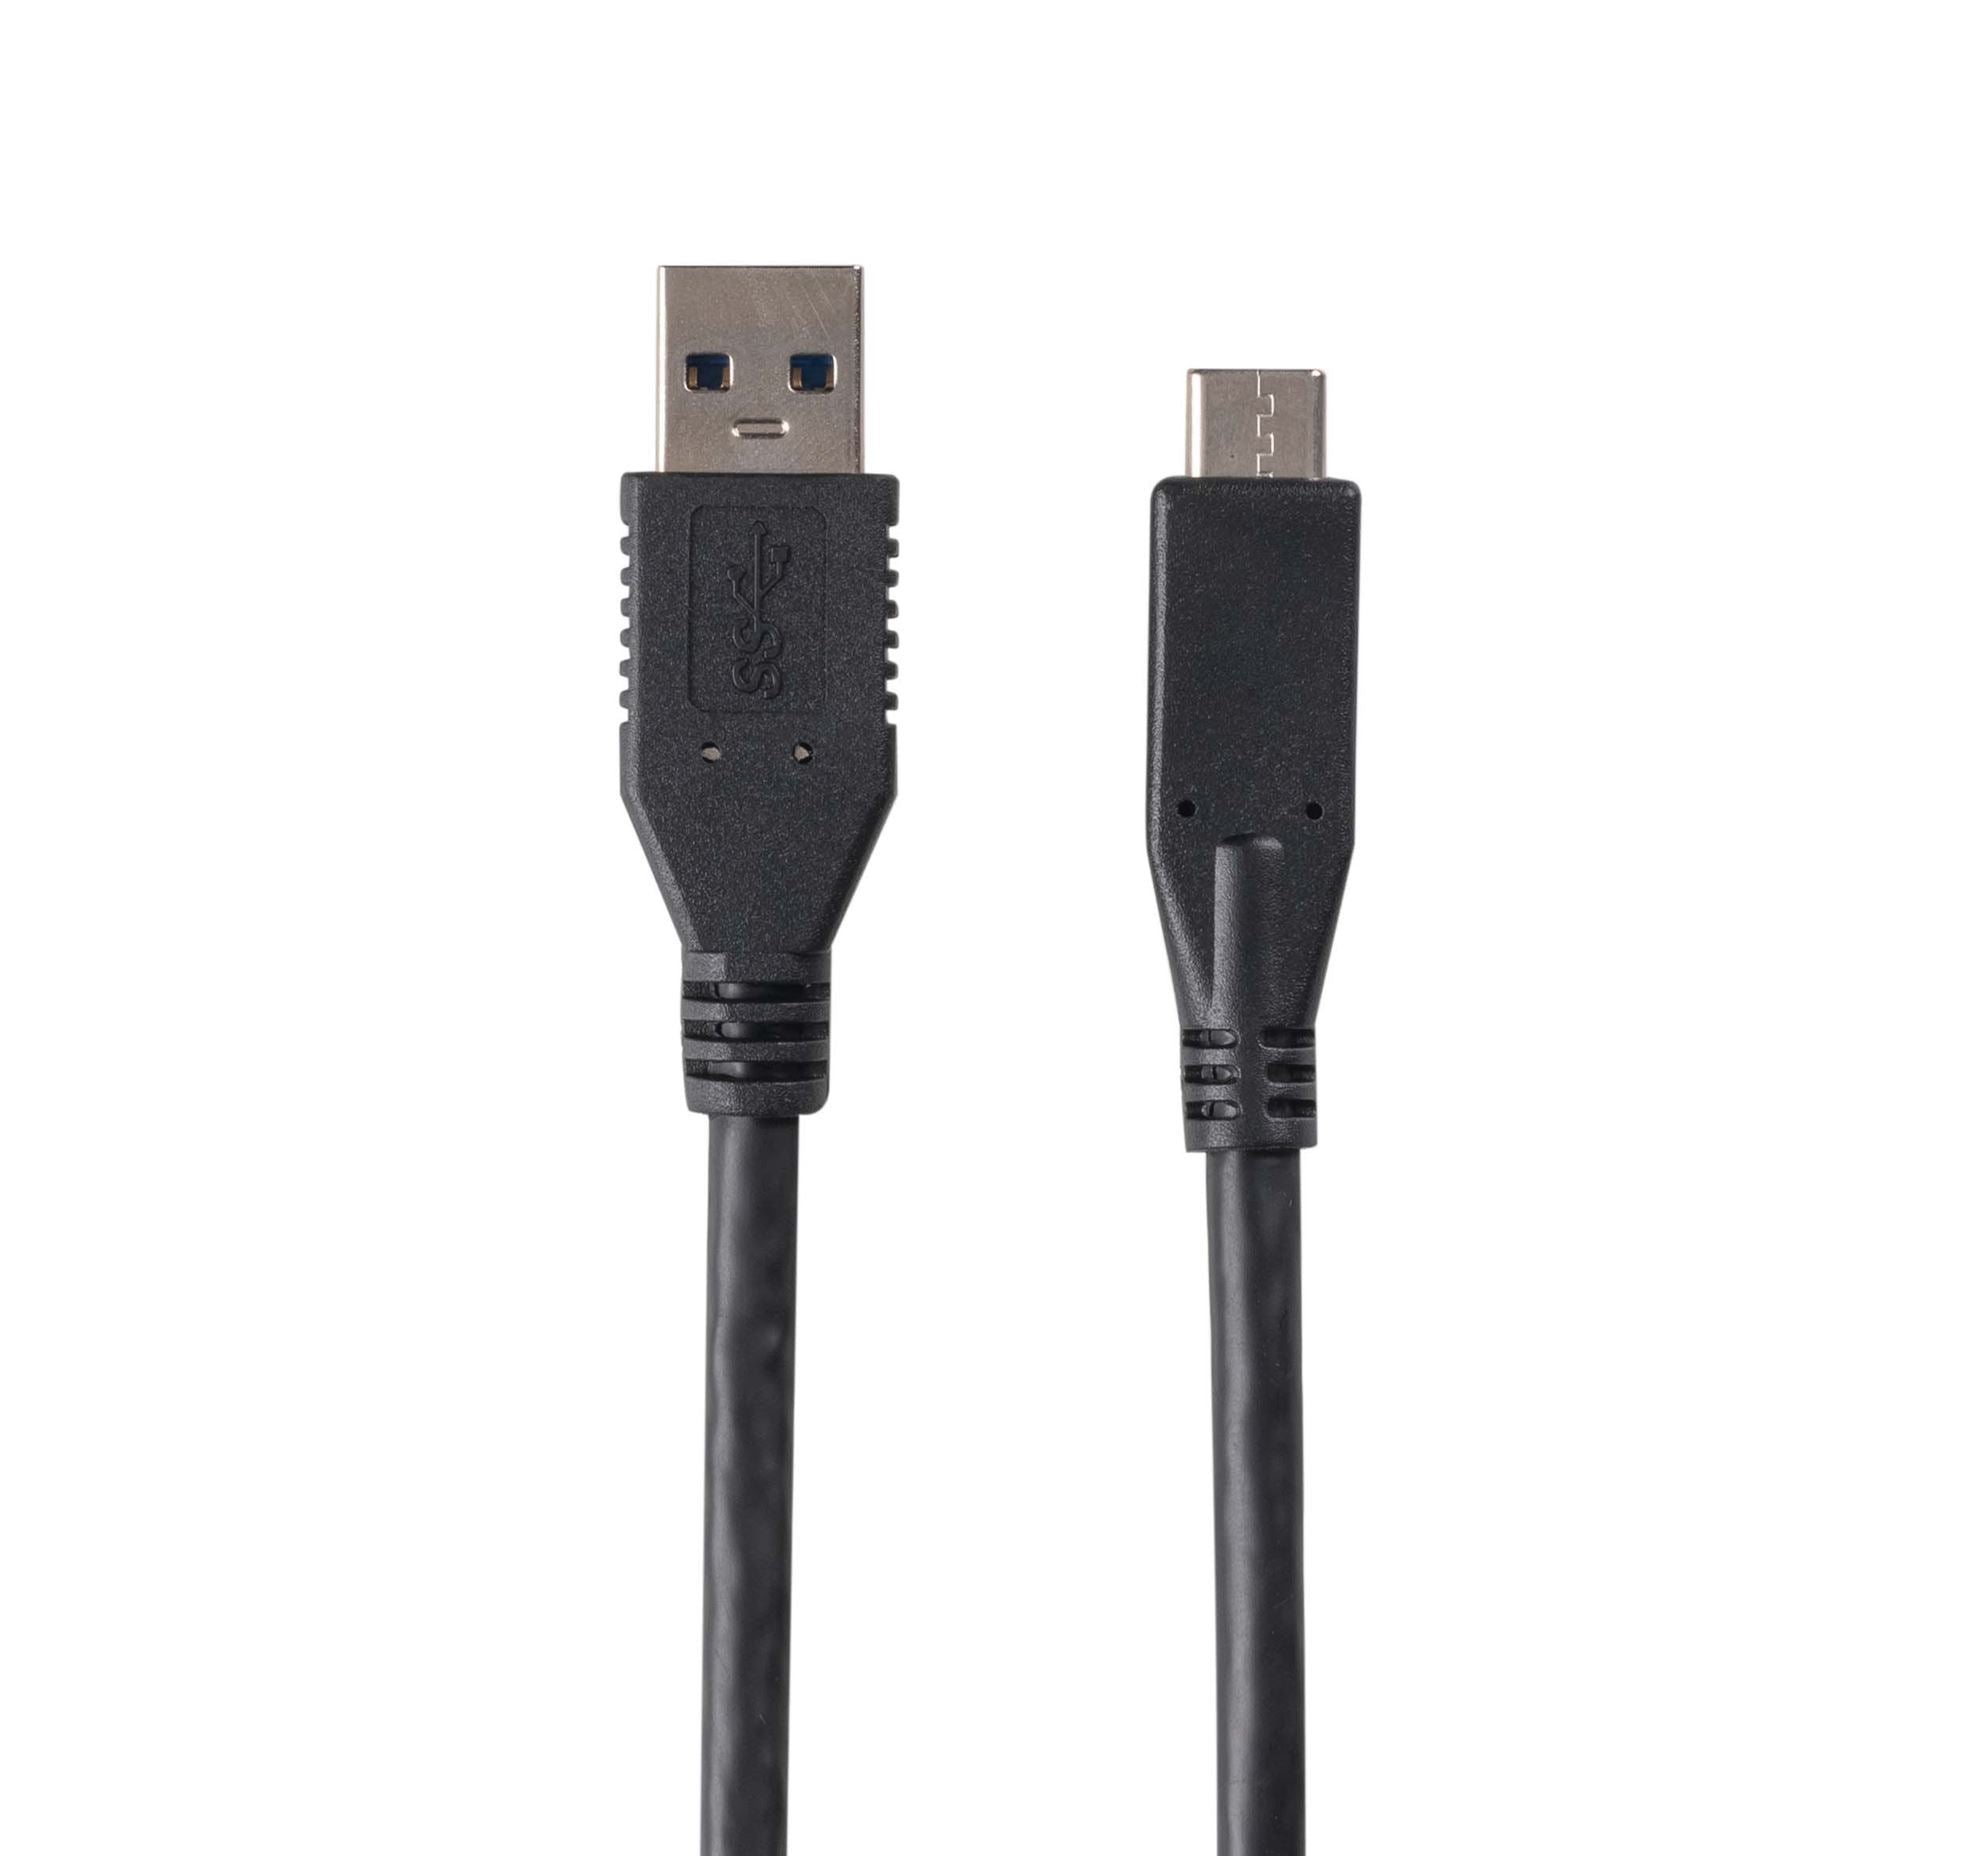 DYNAMIX_3M,_USB_3.1_USB-C_Male_to_USB-A_Male_Cable._Black_Colour._Up_to_10G_Data_Transfer_Speed,_Supports_3A_Current. 1144